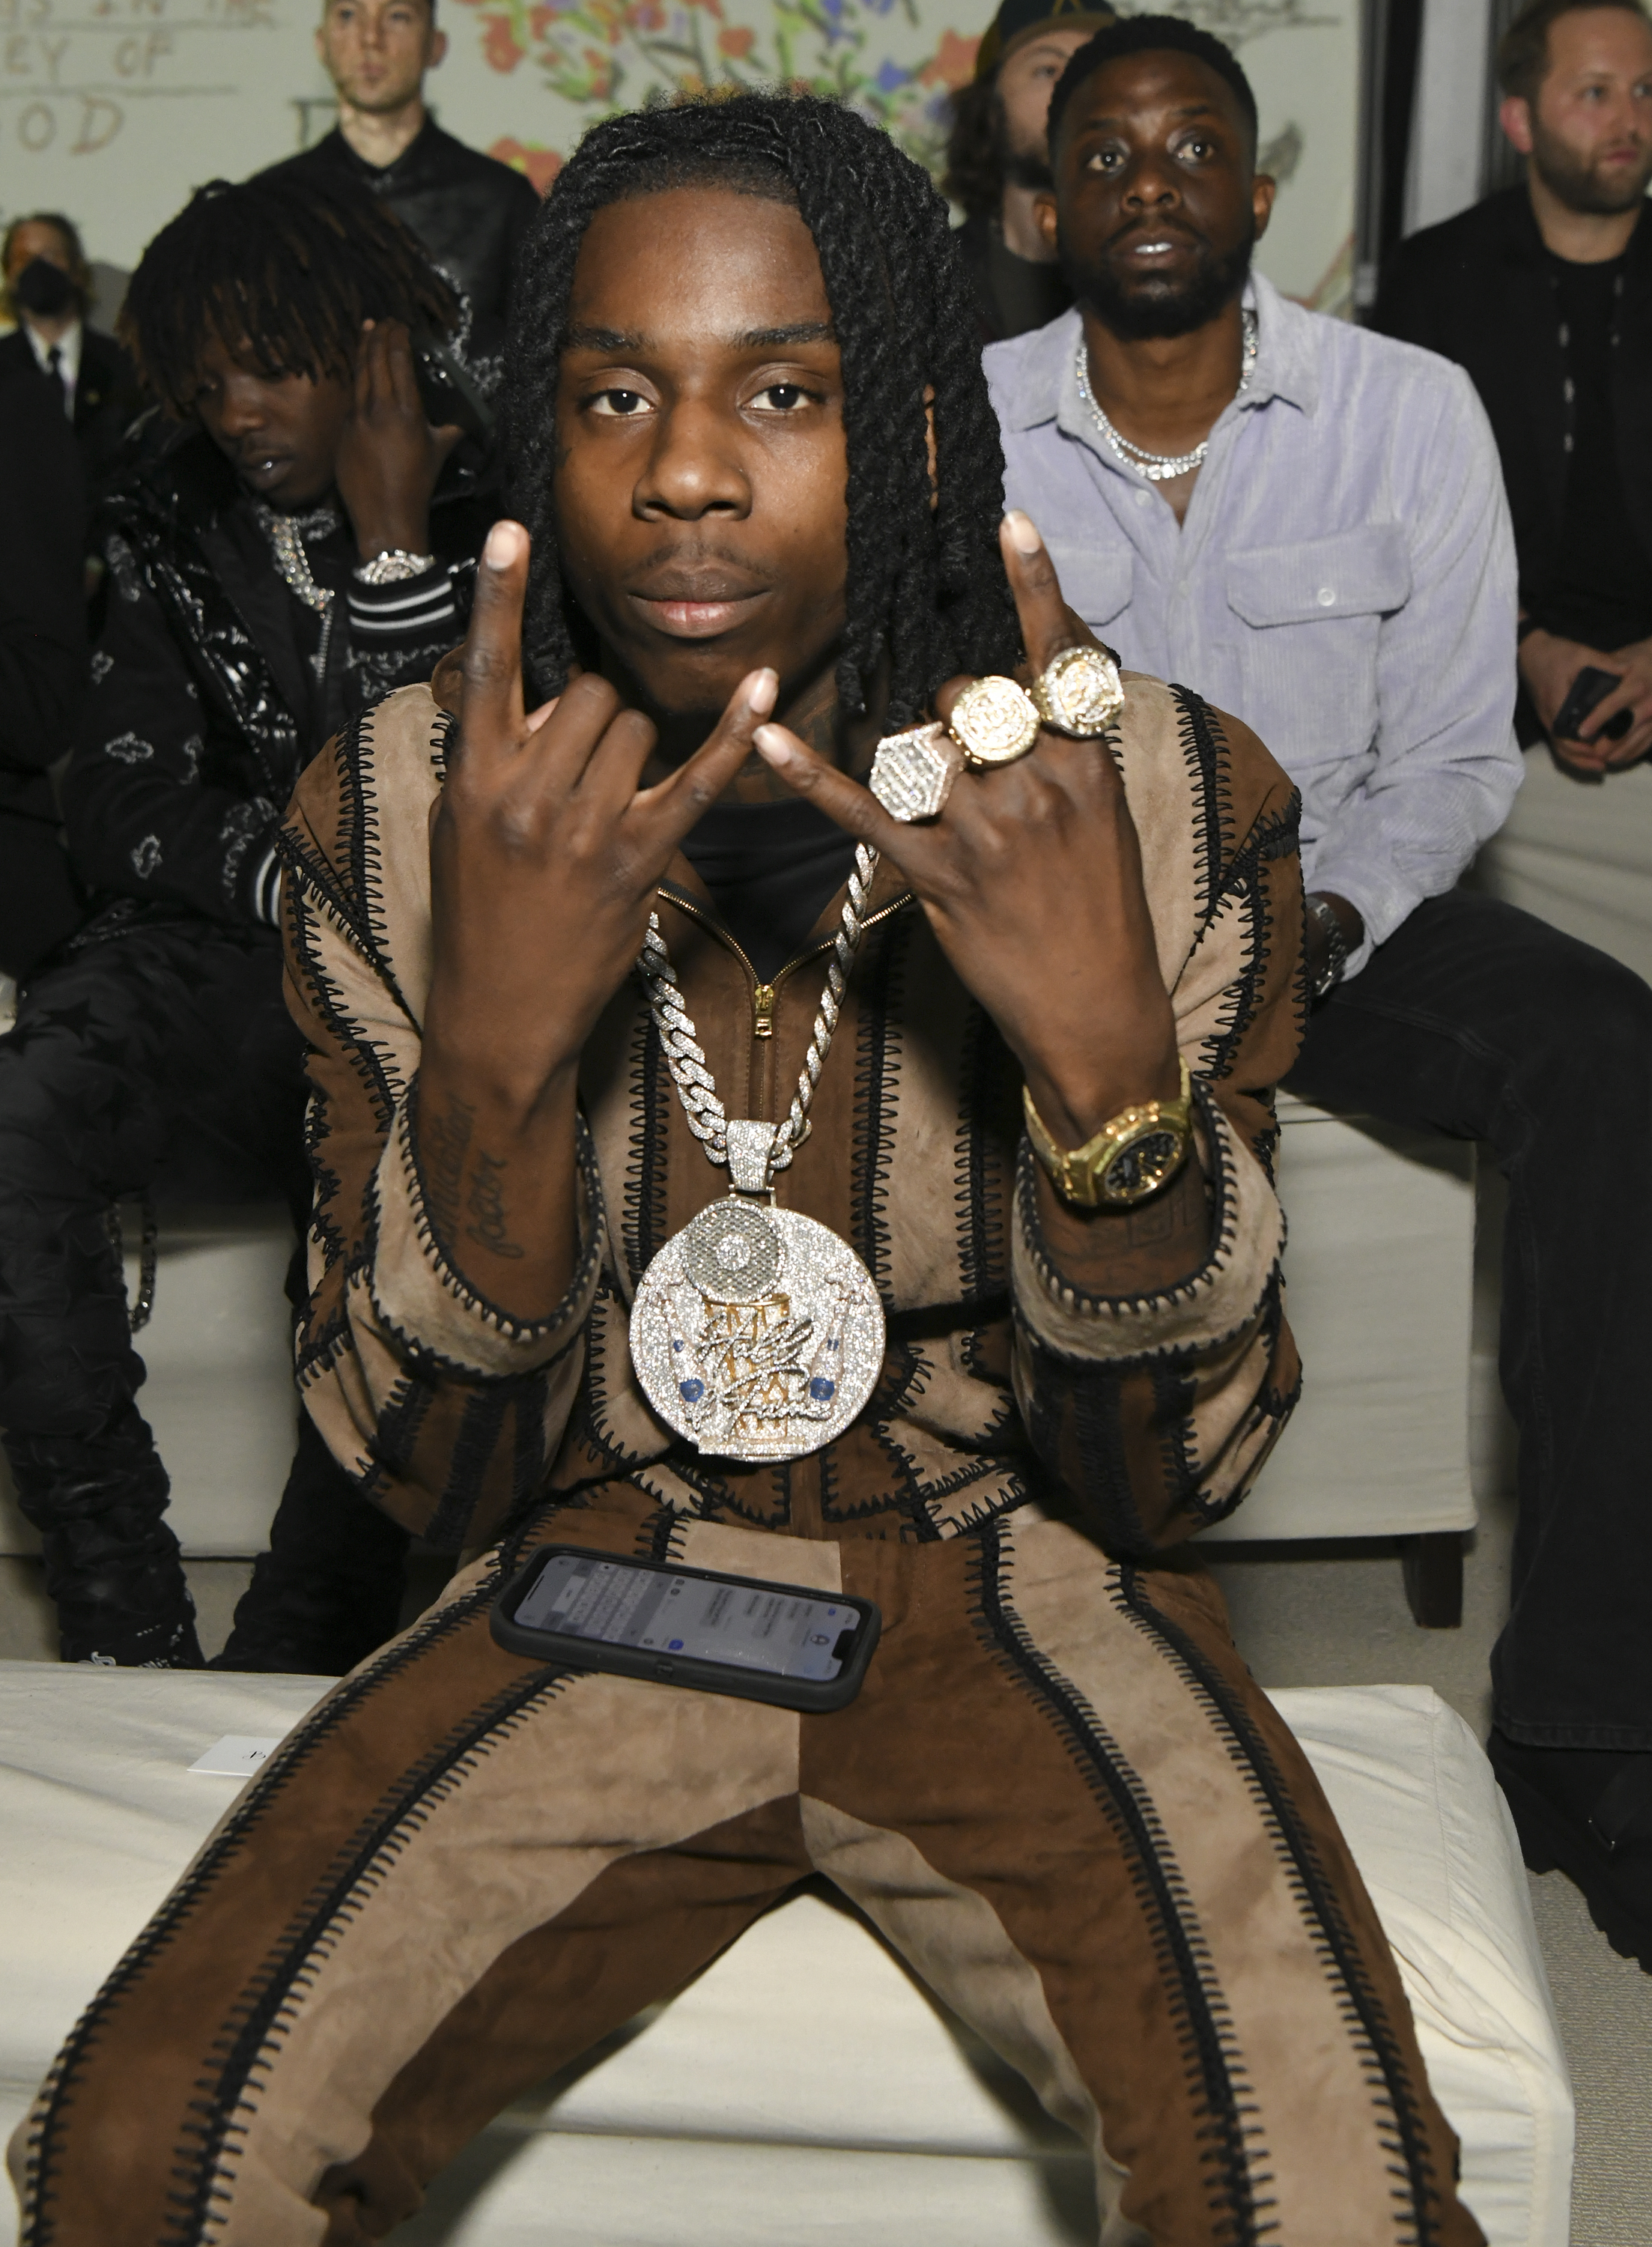 Polo G Shows Off More of His Insane Jewelry Collection, On the Rocks